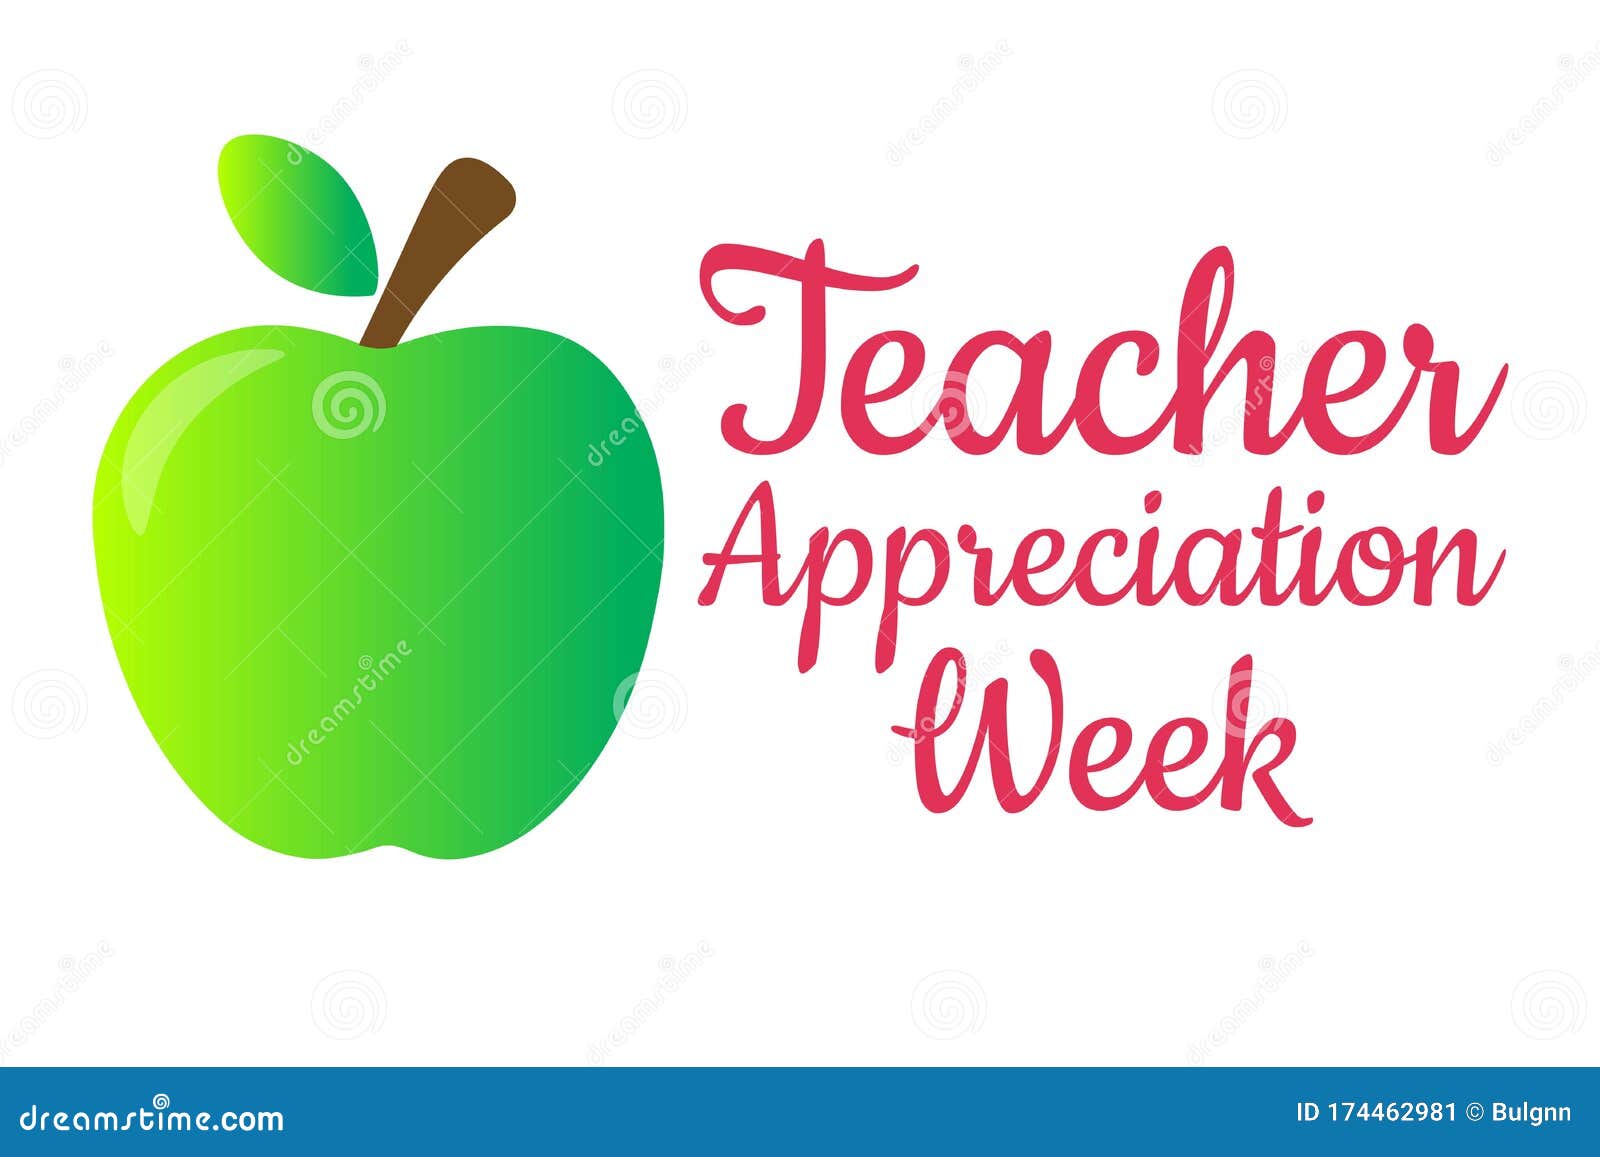 teacher appreciation week. holiday concept. template for background, banner, card, poster with text inscription. 